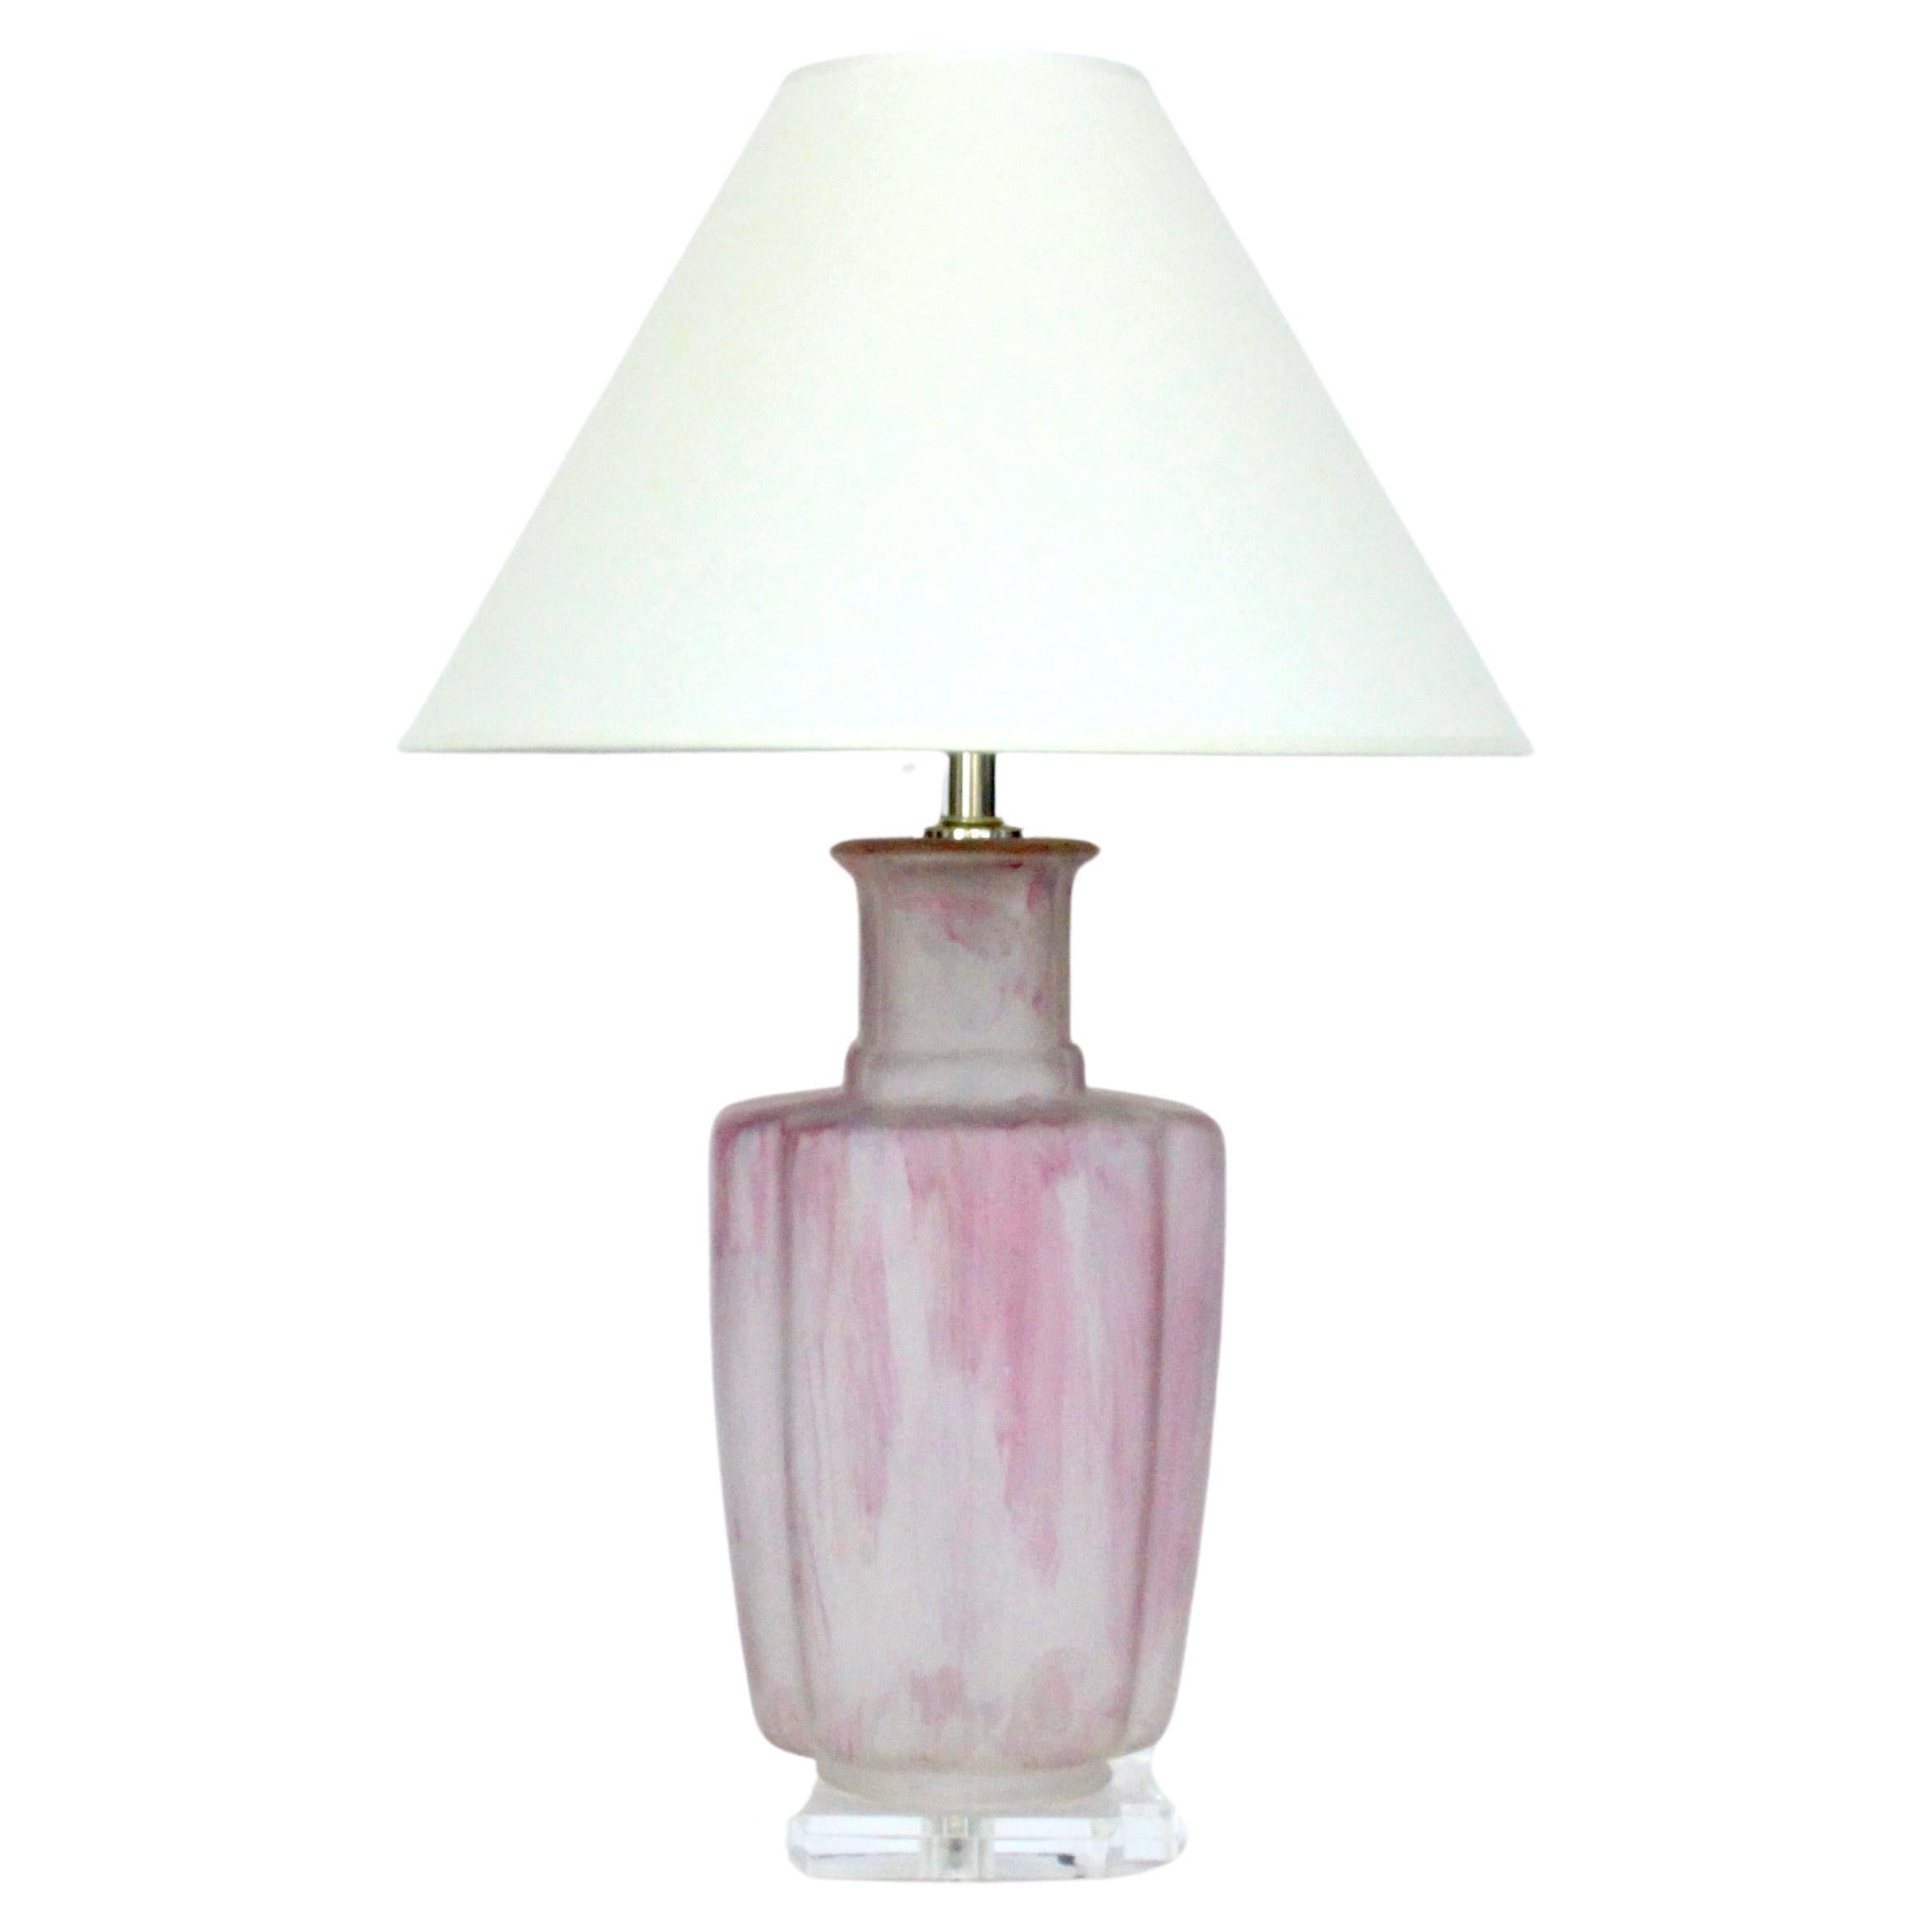 Bauer Lamp Company Mottled Frosted Pink "Clearlite" Glass Table Lamp, 1970's